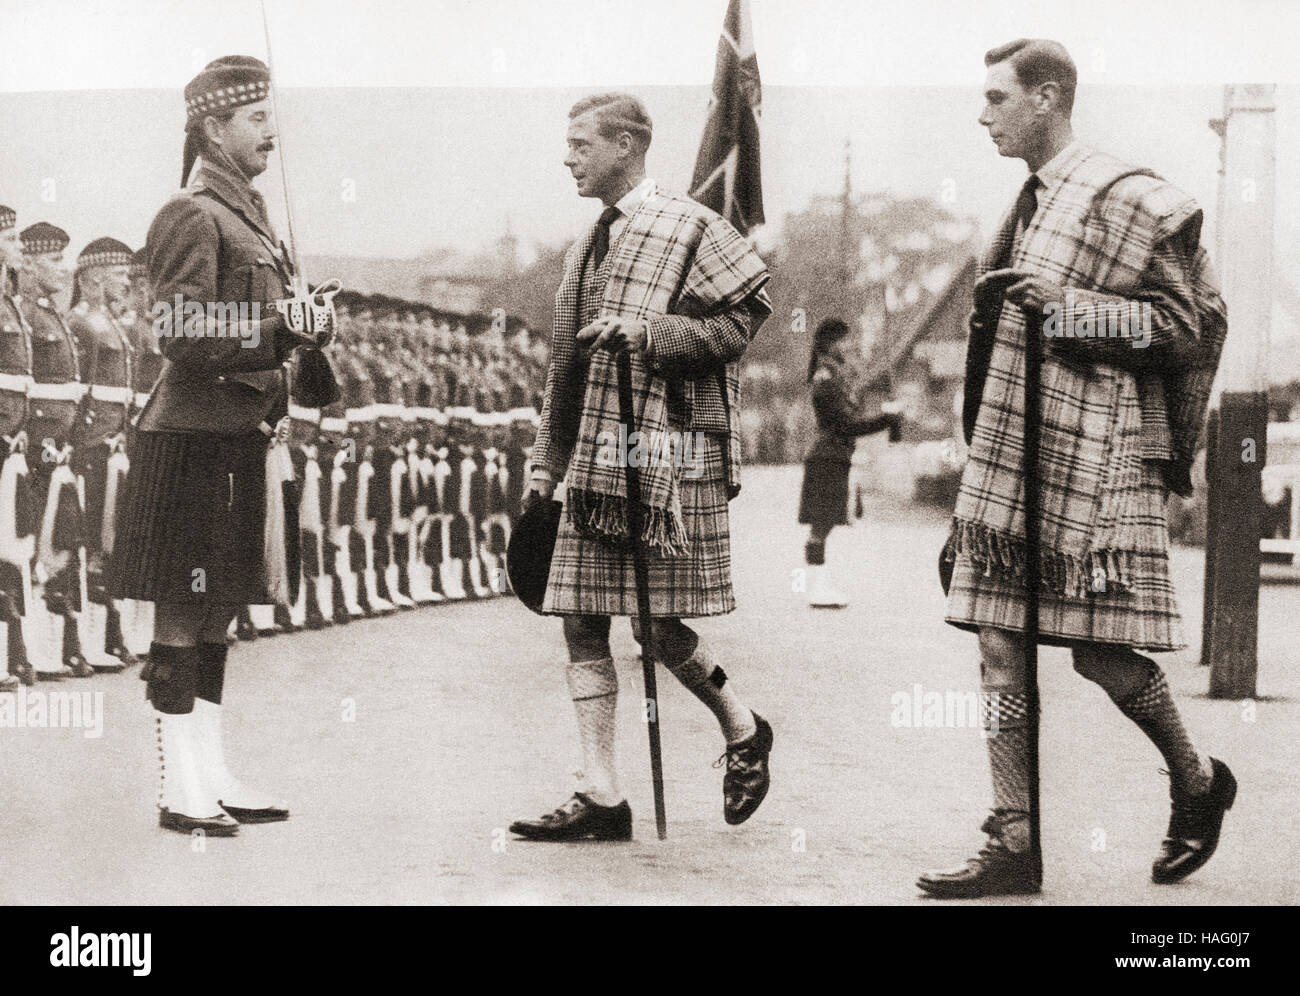 King Edward VIII, middle of picture, and his brother the Duke of York future King George VI at Balmoral in 1936.  Edward VIII, 1894 – 1972.  King of the United Kingdom and the Dominions of the British Empire, and Emperor of India, from 20 January 1936 until his abdication on 11 December the same year.  Duke of York future George VI, 1895 – 1952.  King of the United Kingdom and the Dominions of the British Commonwealth. Stock Photo